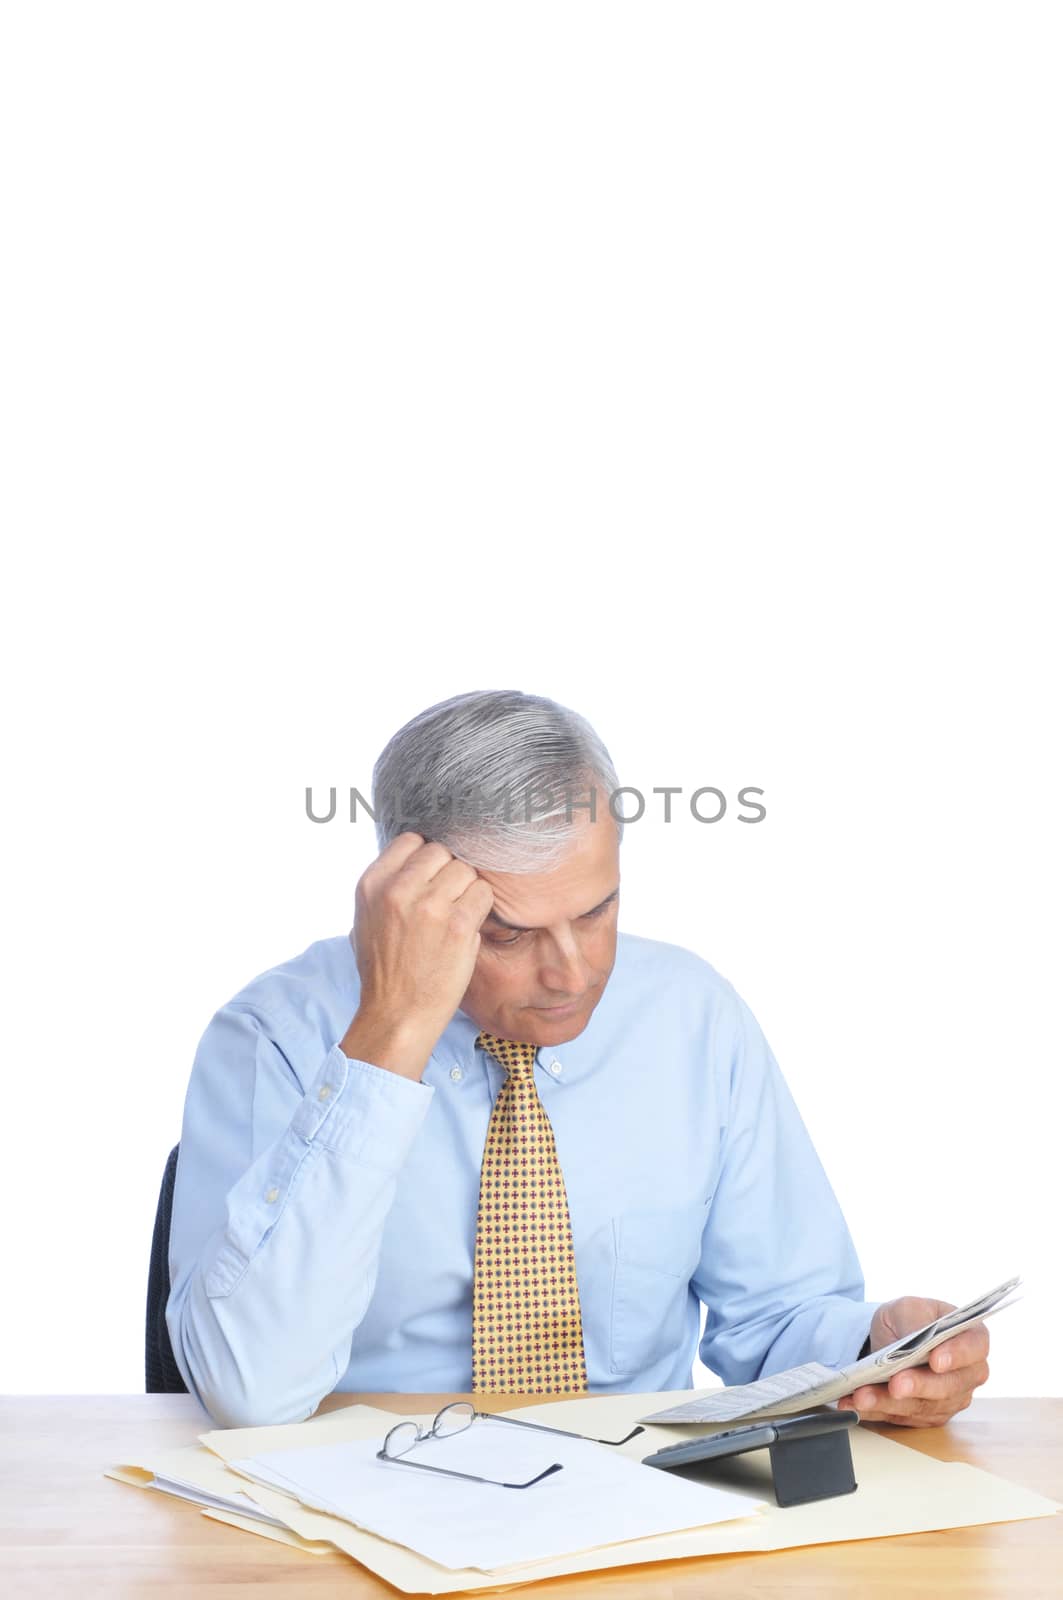 Businessman Reading Newspaper at His Desk isolated on white